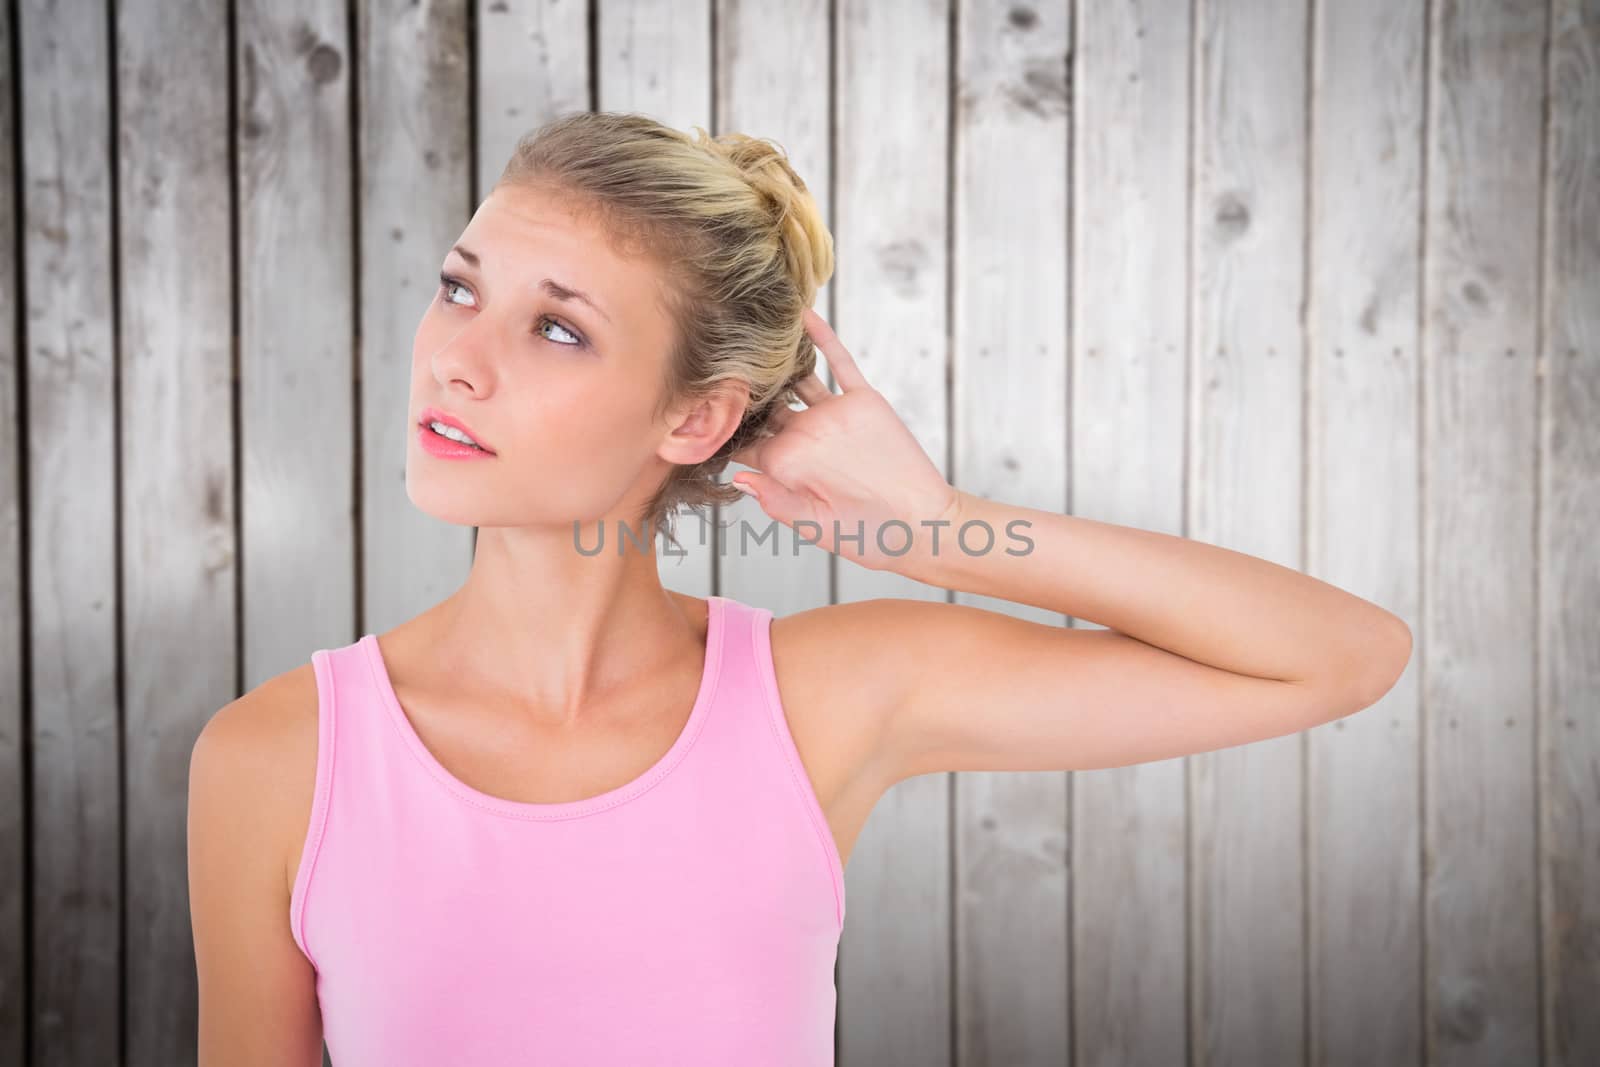 Pretty young blonde in pink looking up against wooden planks